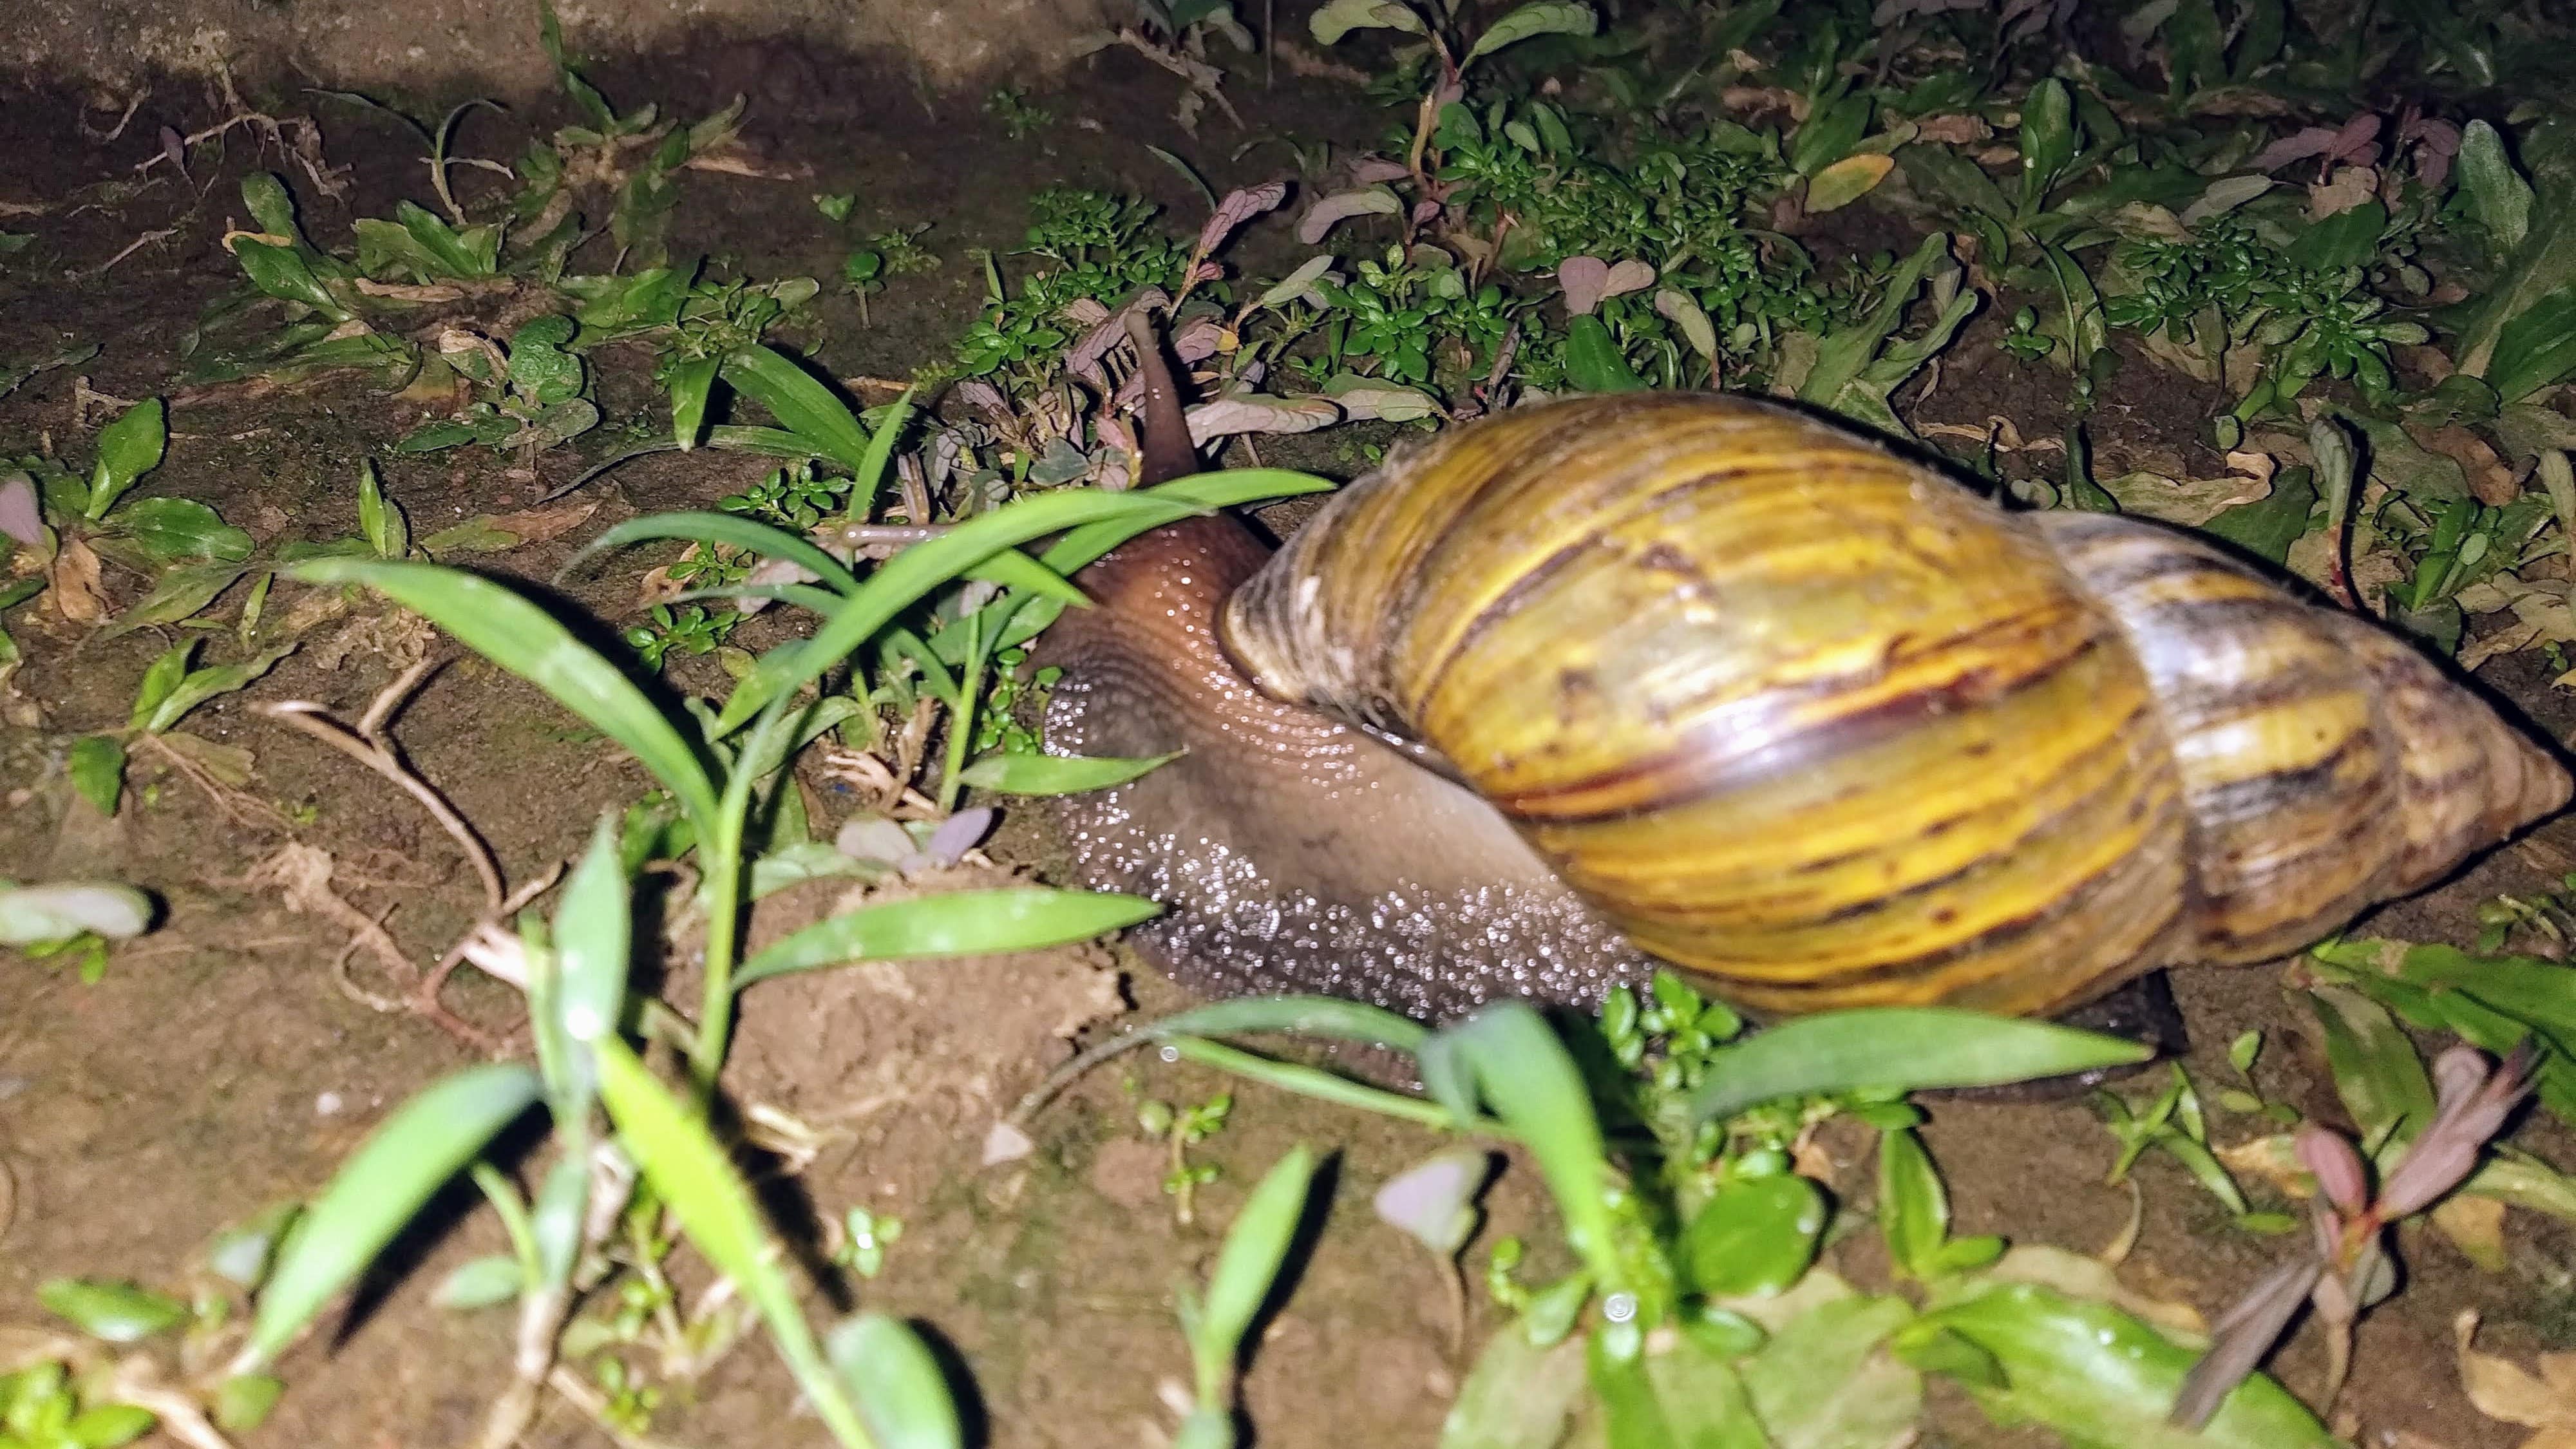 The biggest snail we found; seems the most accomplished snail taking its time. Haha! • Header image for: Anxiety and Importance of Rest • Just some musings on active waiting and resting • Ayo's Blog • Blogs on tech, life, and personal growth • Ayo Ayco